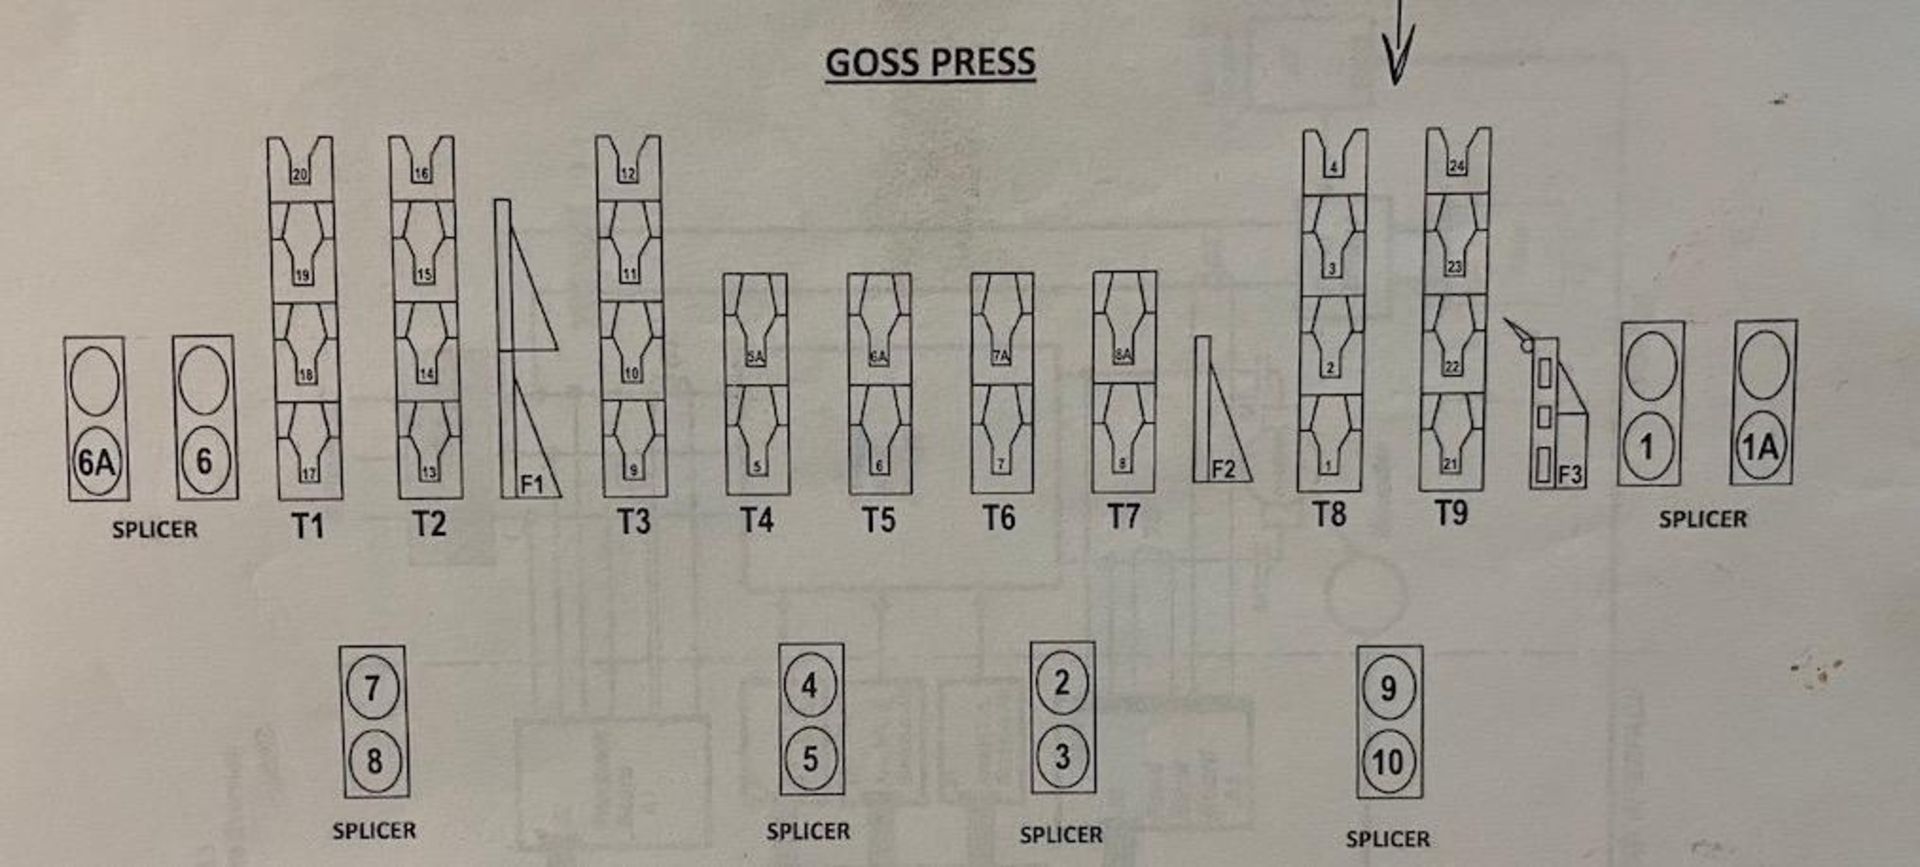 LOT GOSS PRINTING LINE, LOTS 58A-58G PLUS ELECTRICAL, INCLUDING: 28 UNITS: (5) 4 HIGH, (4) 2 HIGH 34 - Image 24 of 27